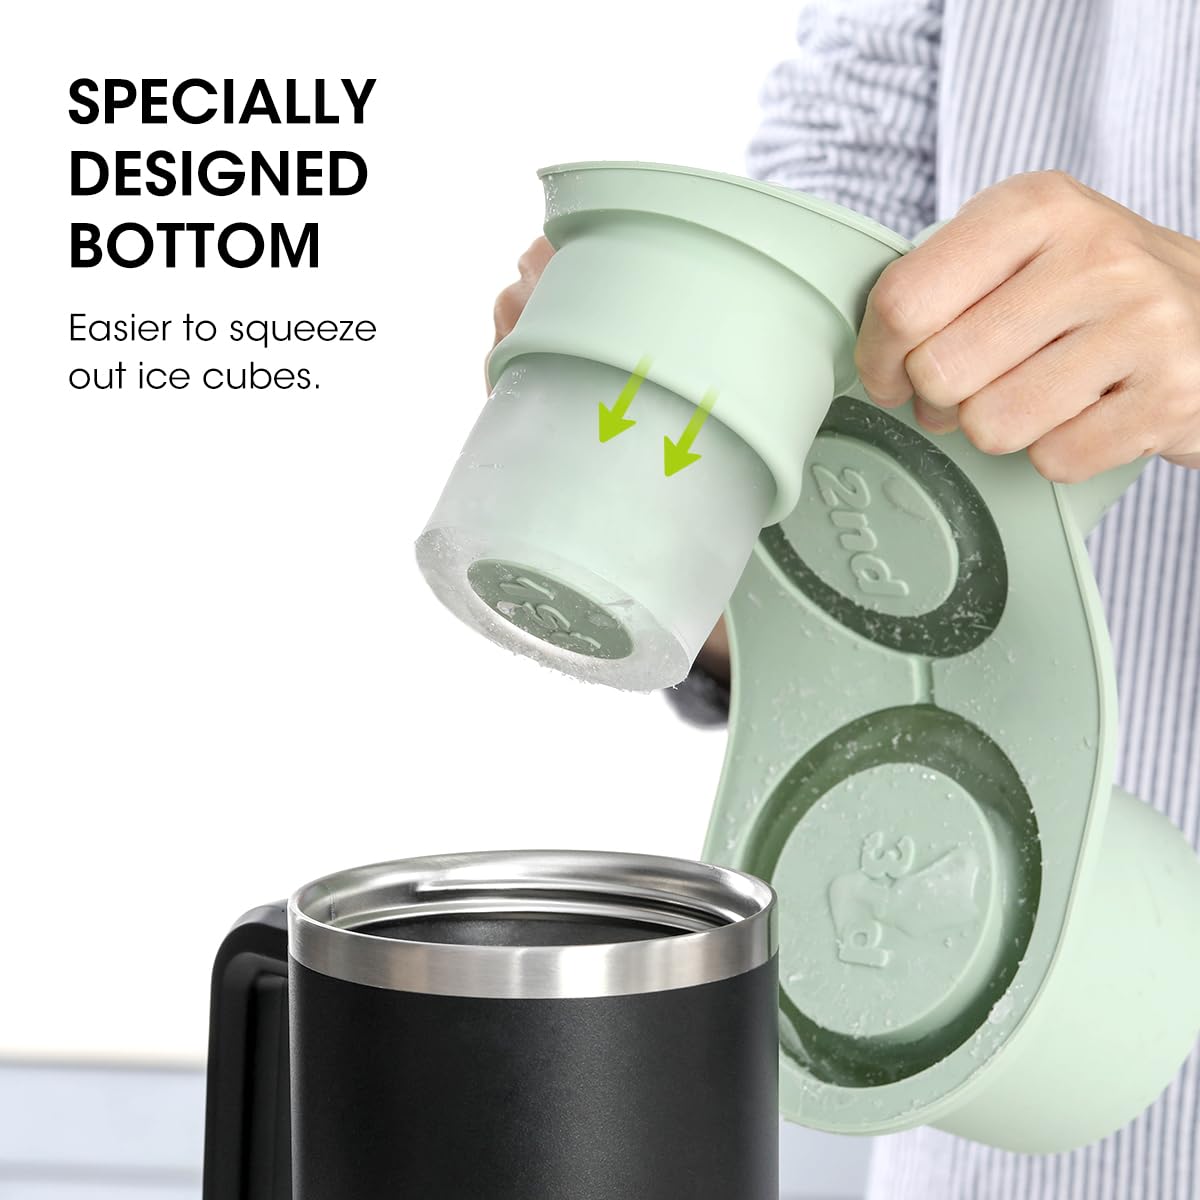 speciallyt designed bottom, easier to squeeze out ice cubes